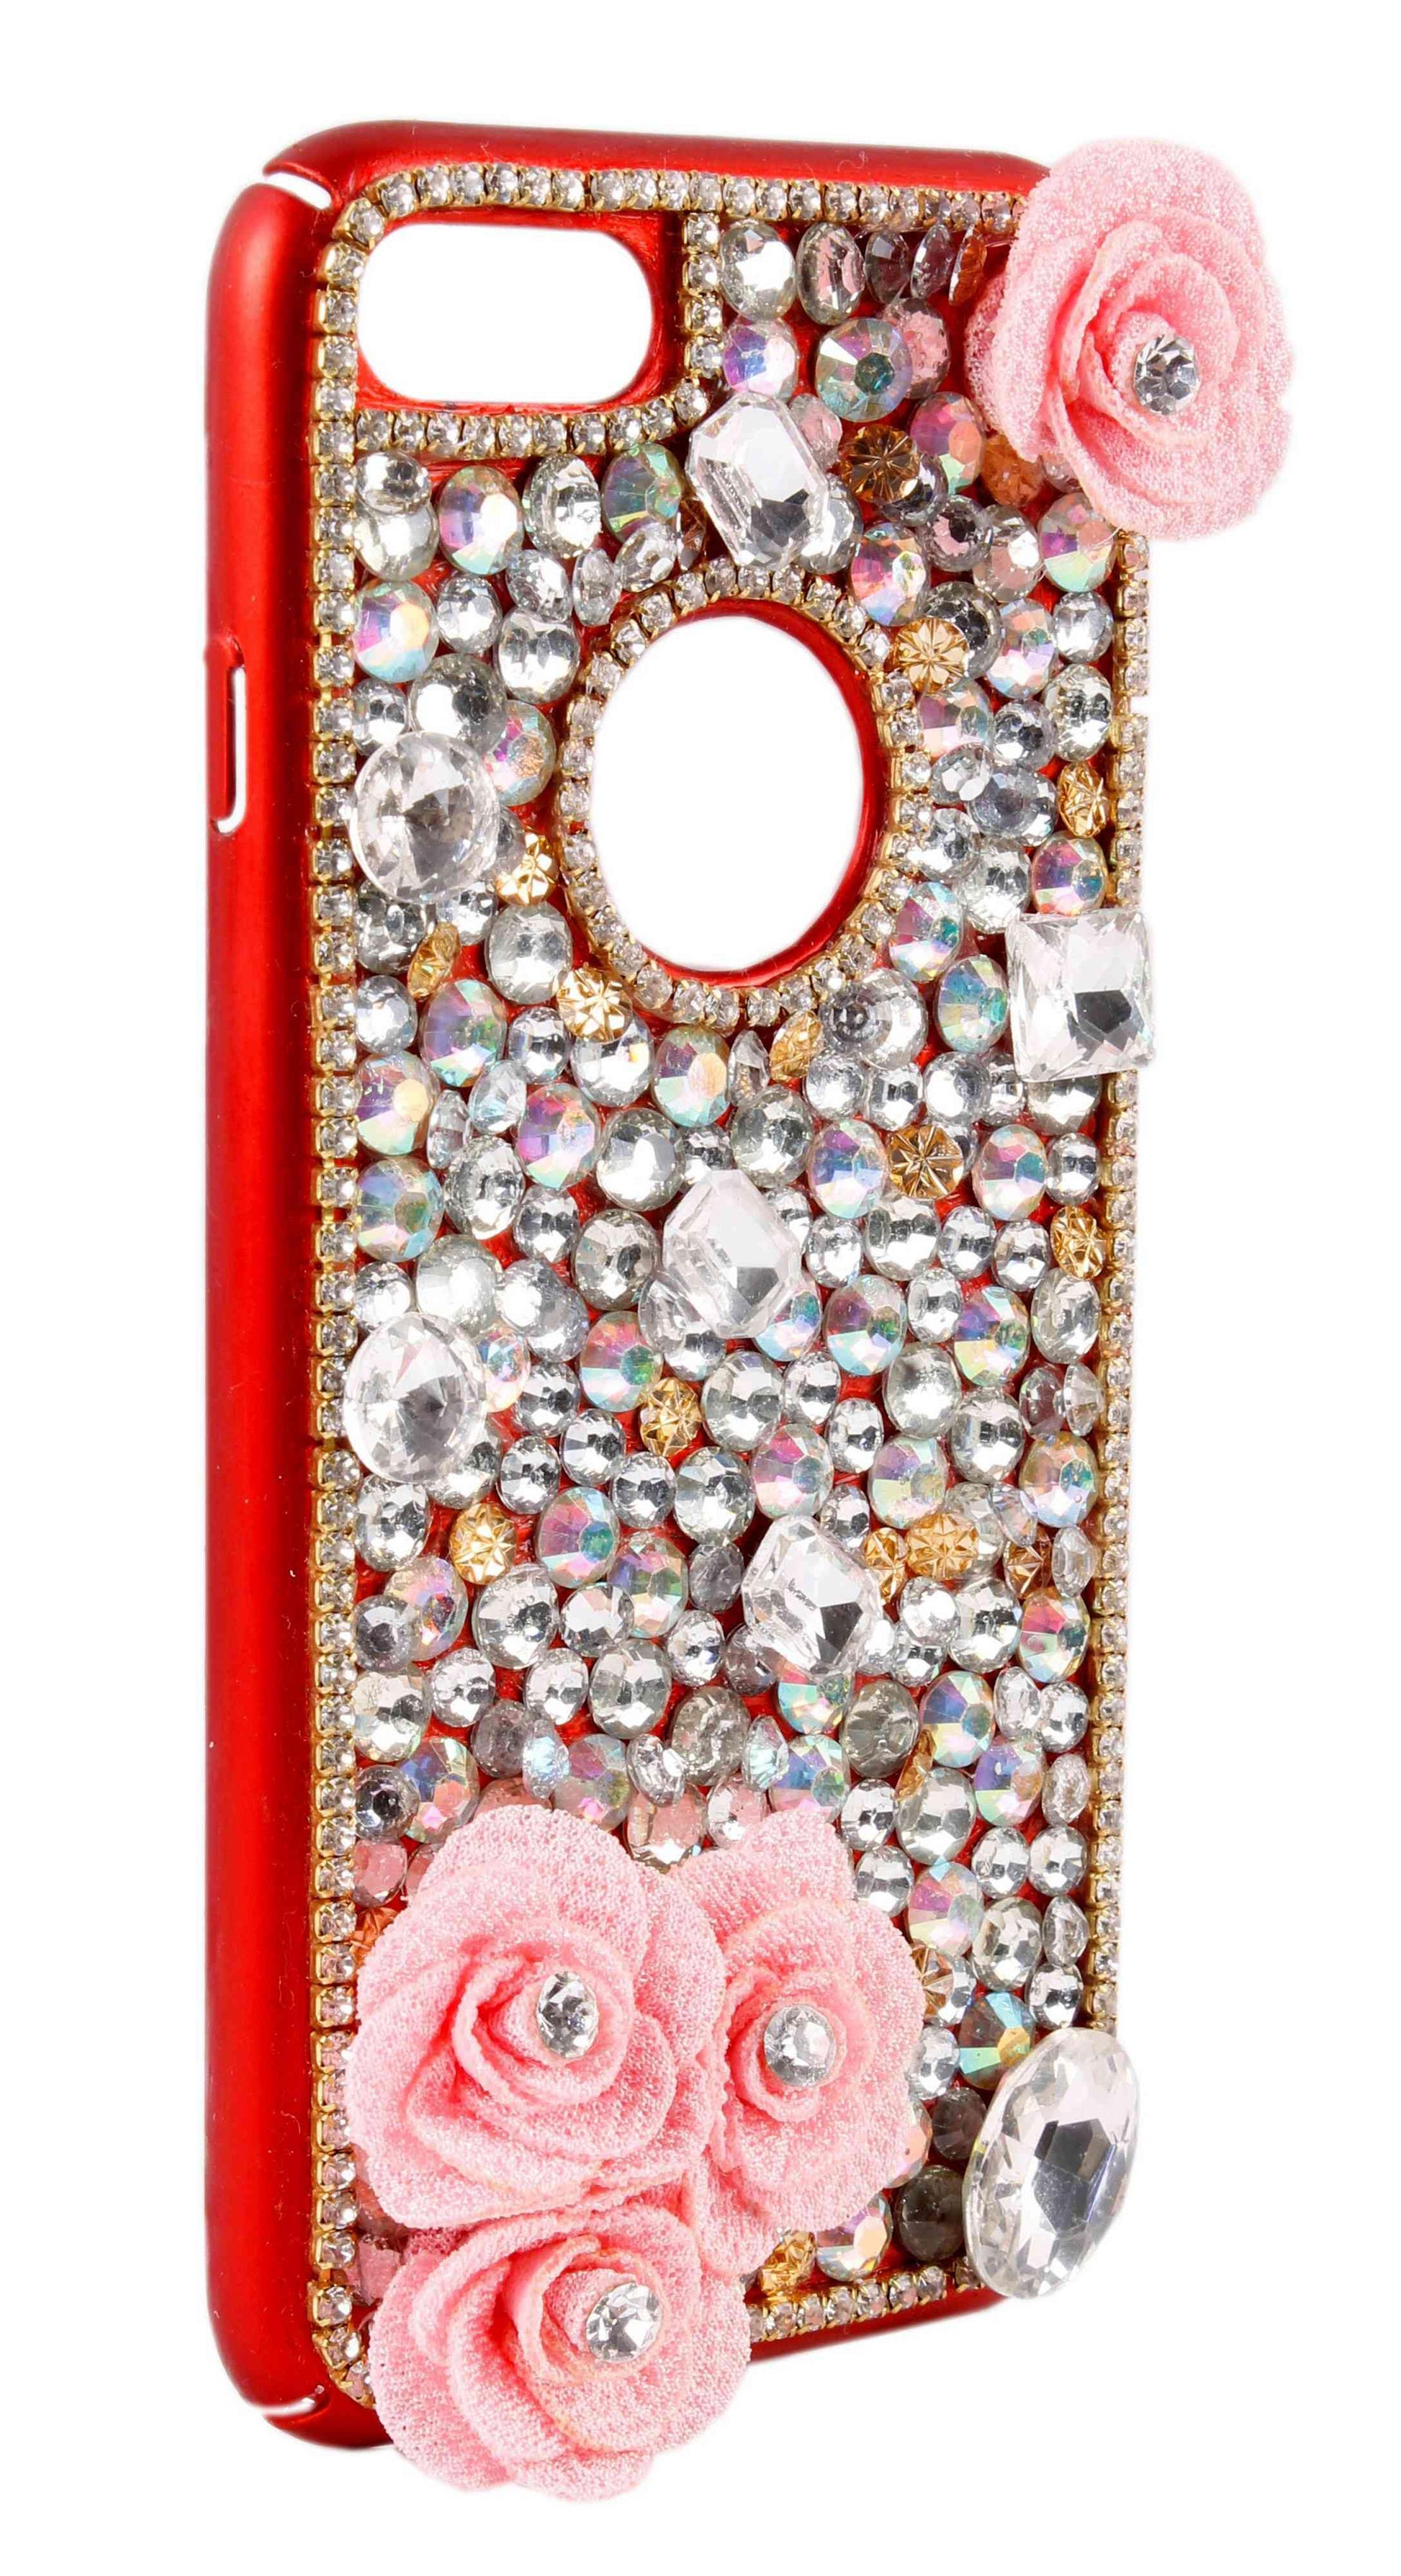 Crystal Rhinestone Studded Floral Design with Border Handmade Designer Hot Red Party Mobile Bling Cover for Apple iPhone 7